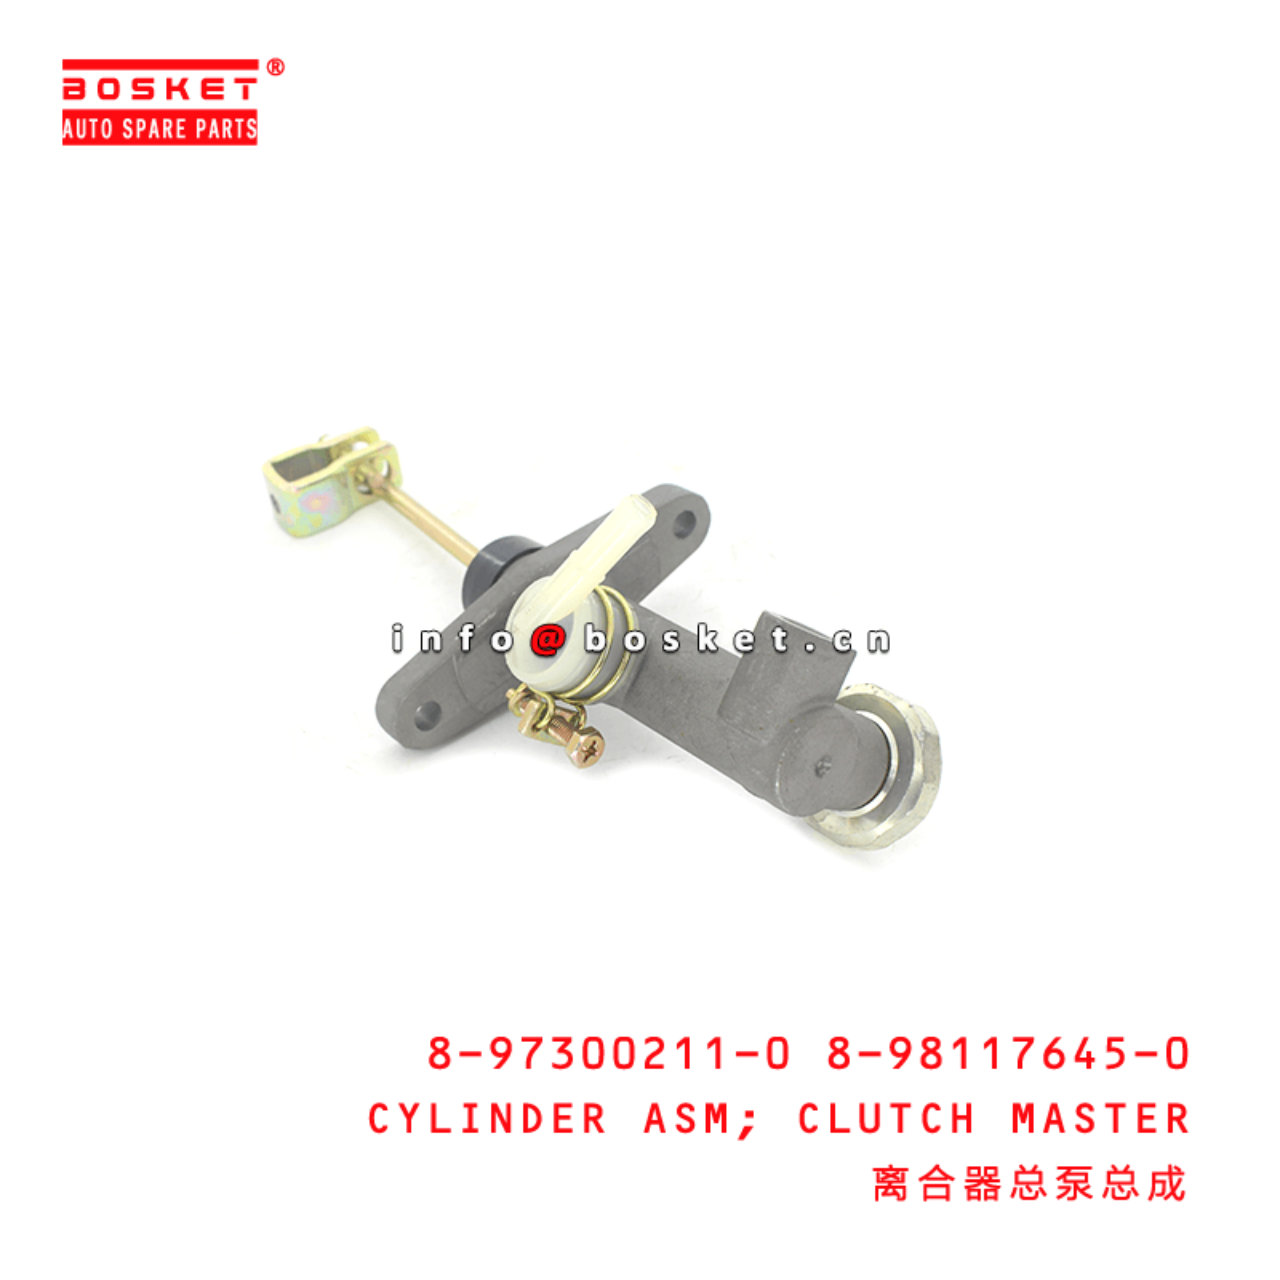 8-97300211-0 8-98117645-0 Clutch Master Cylinder Assembly 8973002110 8981176450 Suitable for ISUZU N